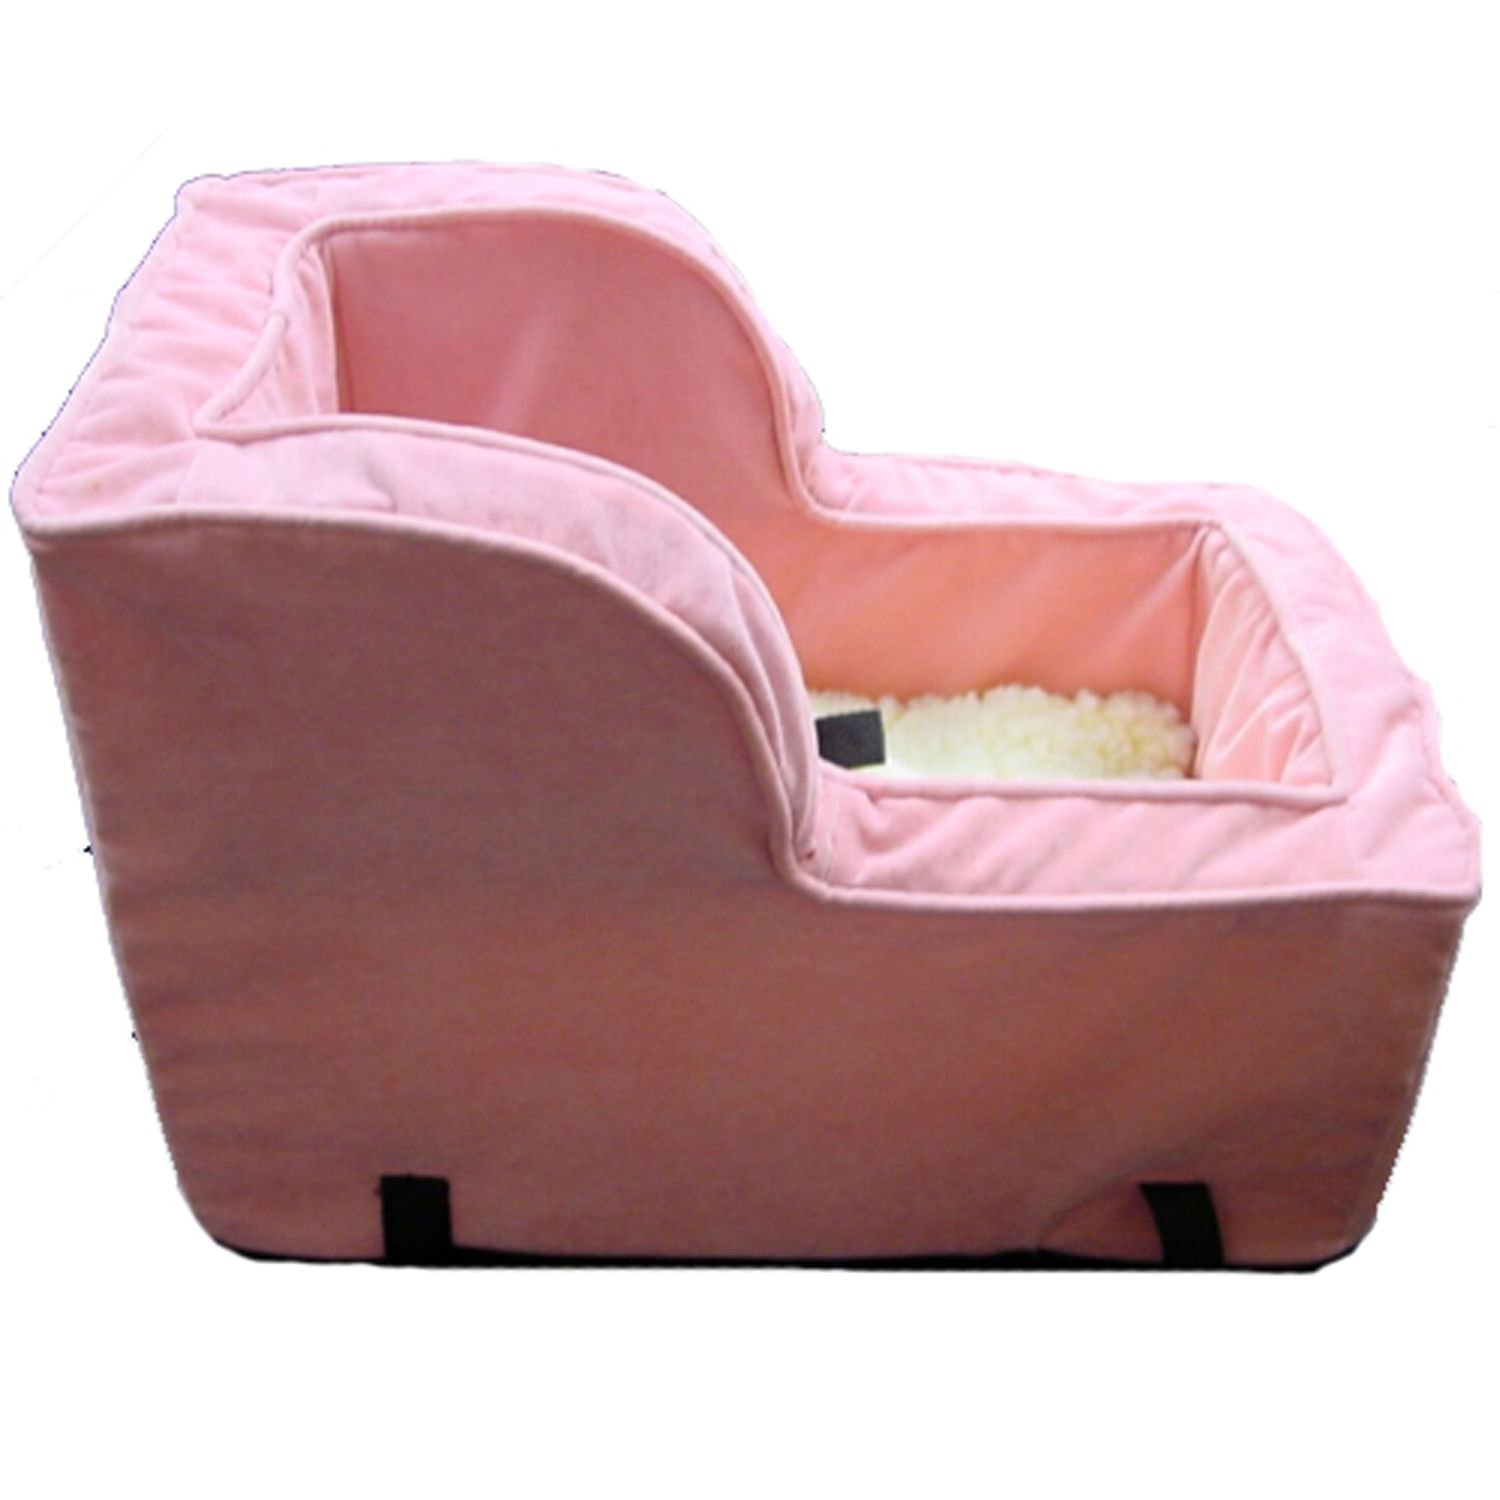 Snoozer Luxury High-Back Console in Pink | Petco